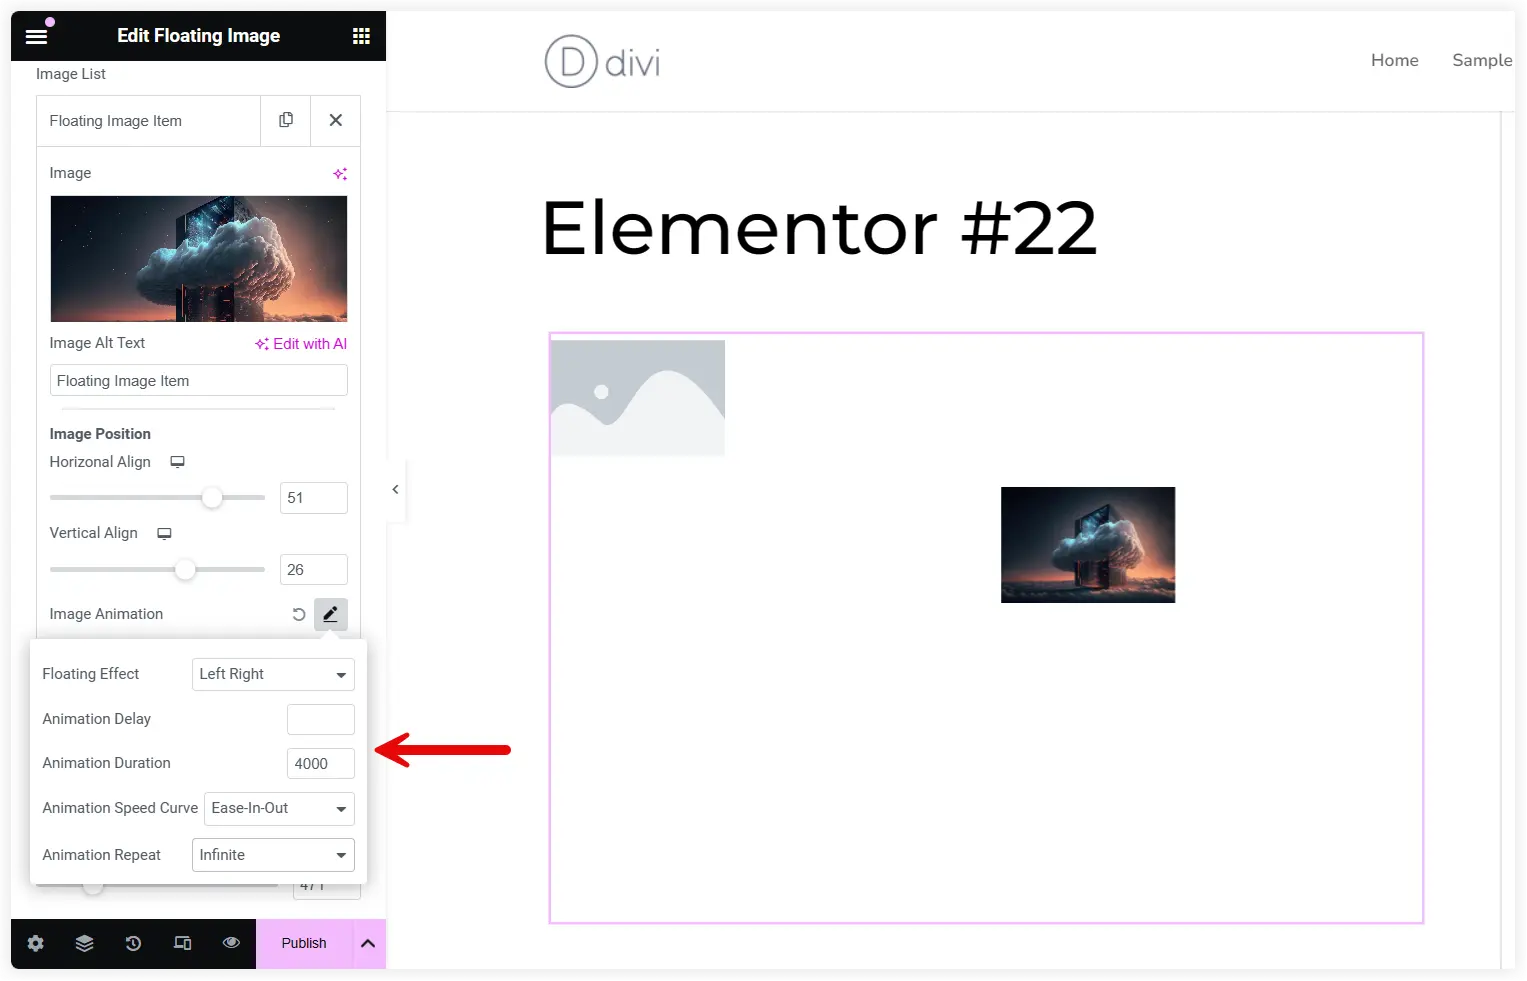 Configure a Floating Image in Elementor